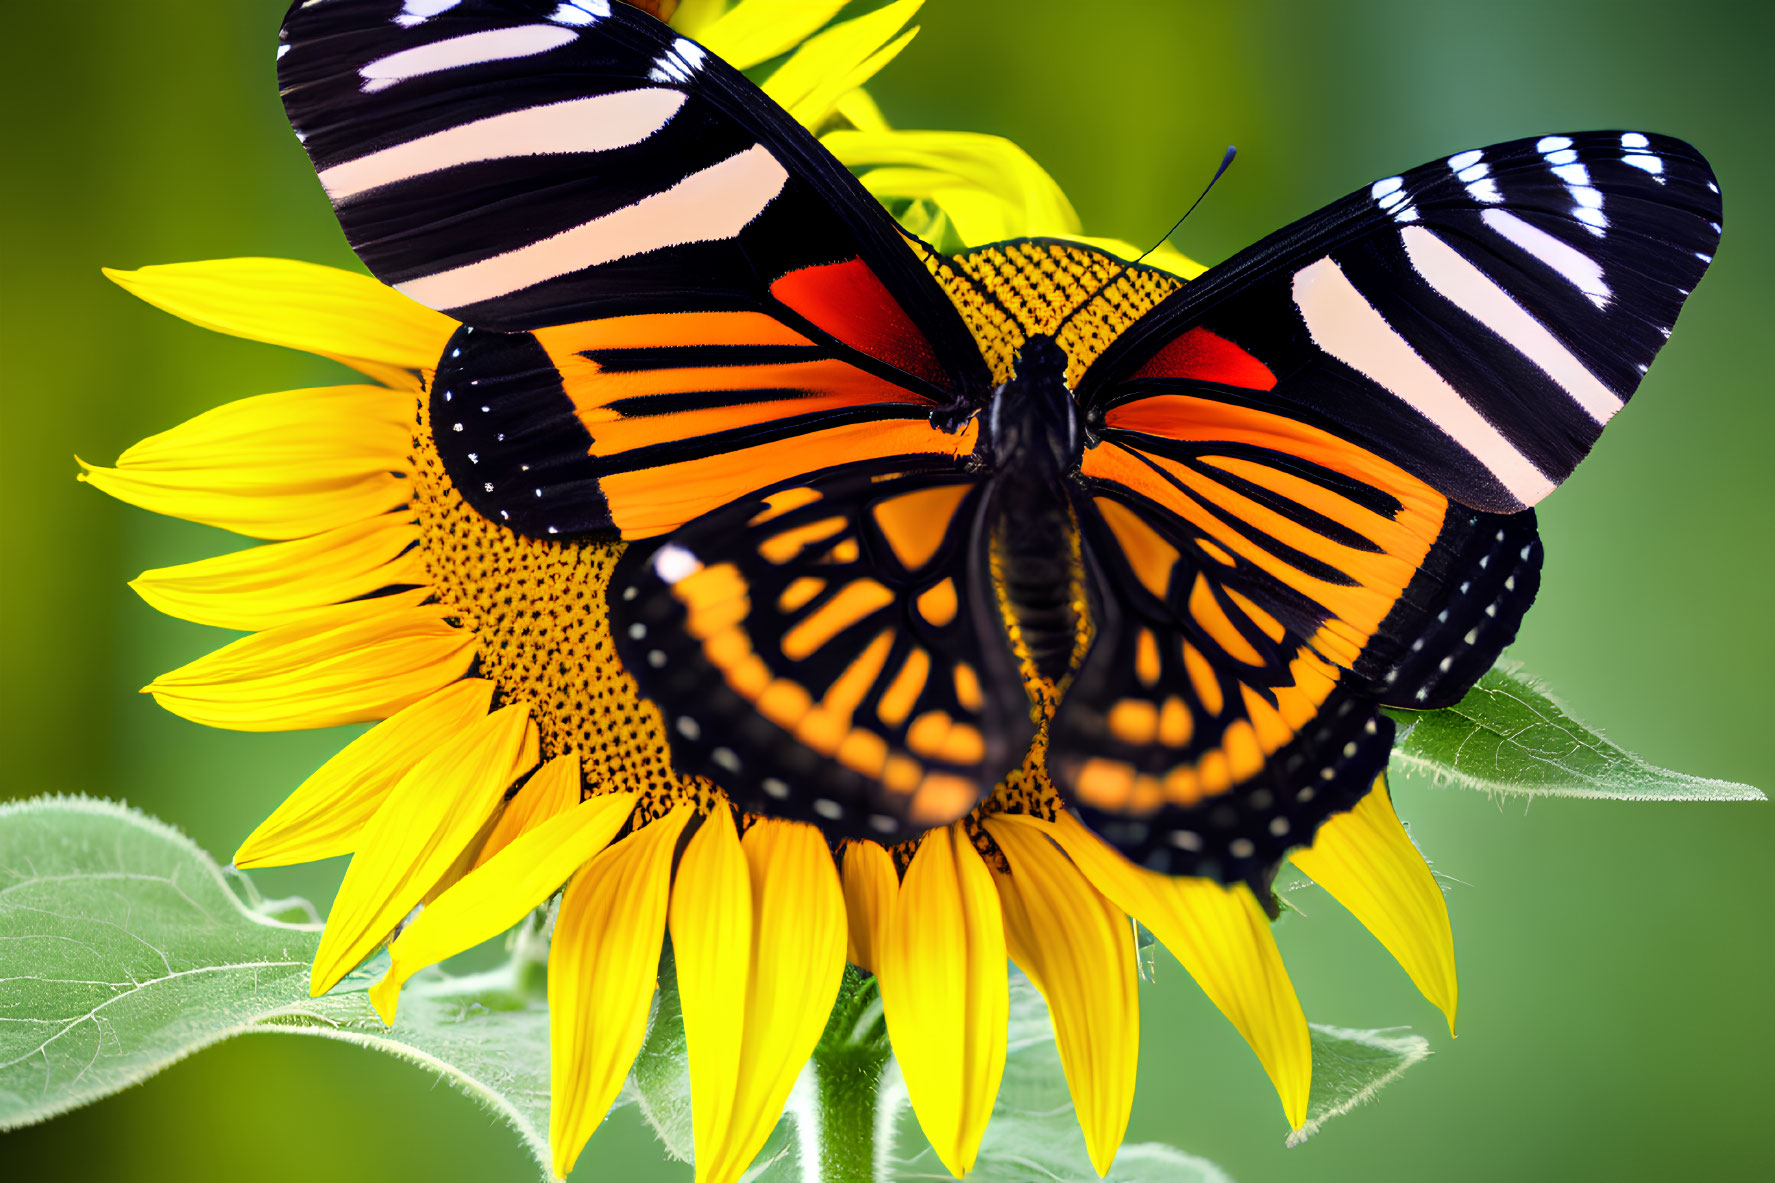 Colorful Butterfly on Yellow Sunflower with Green Background